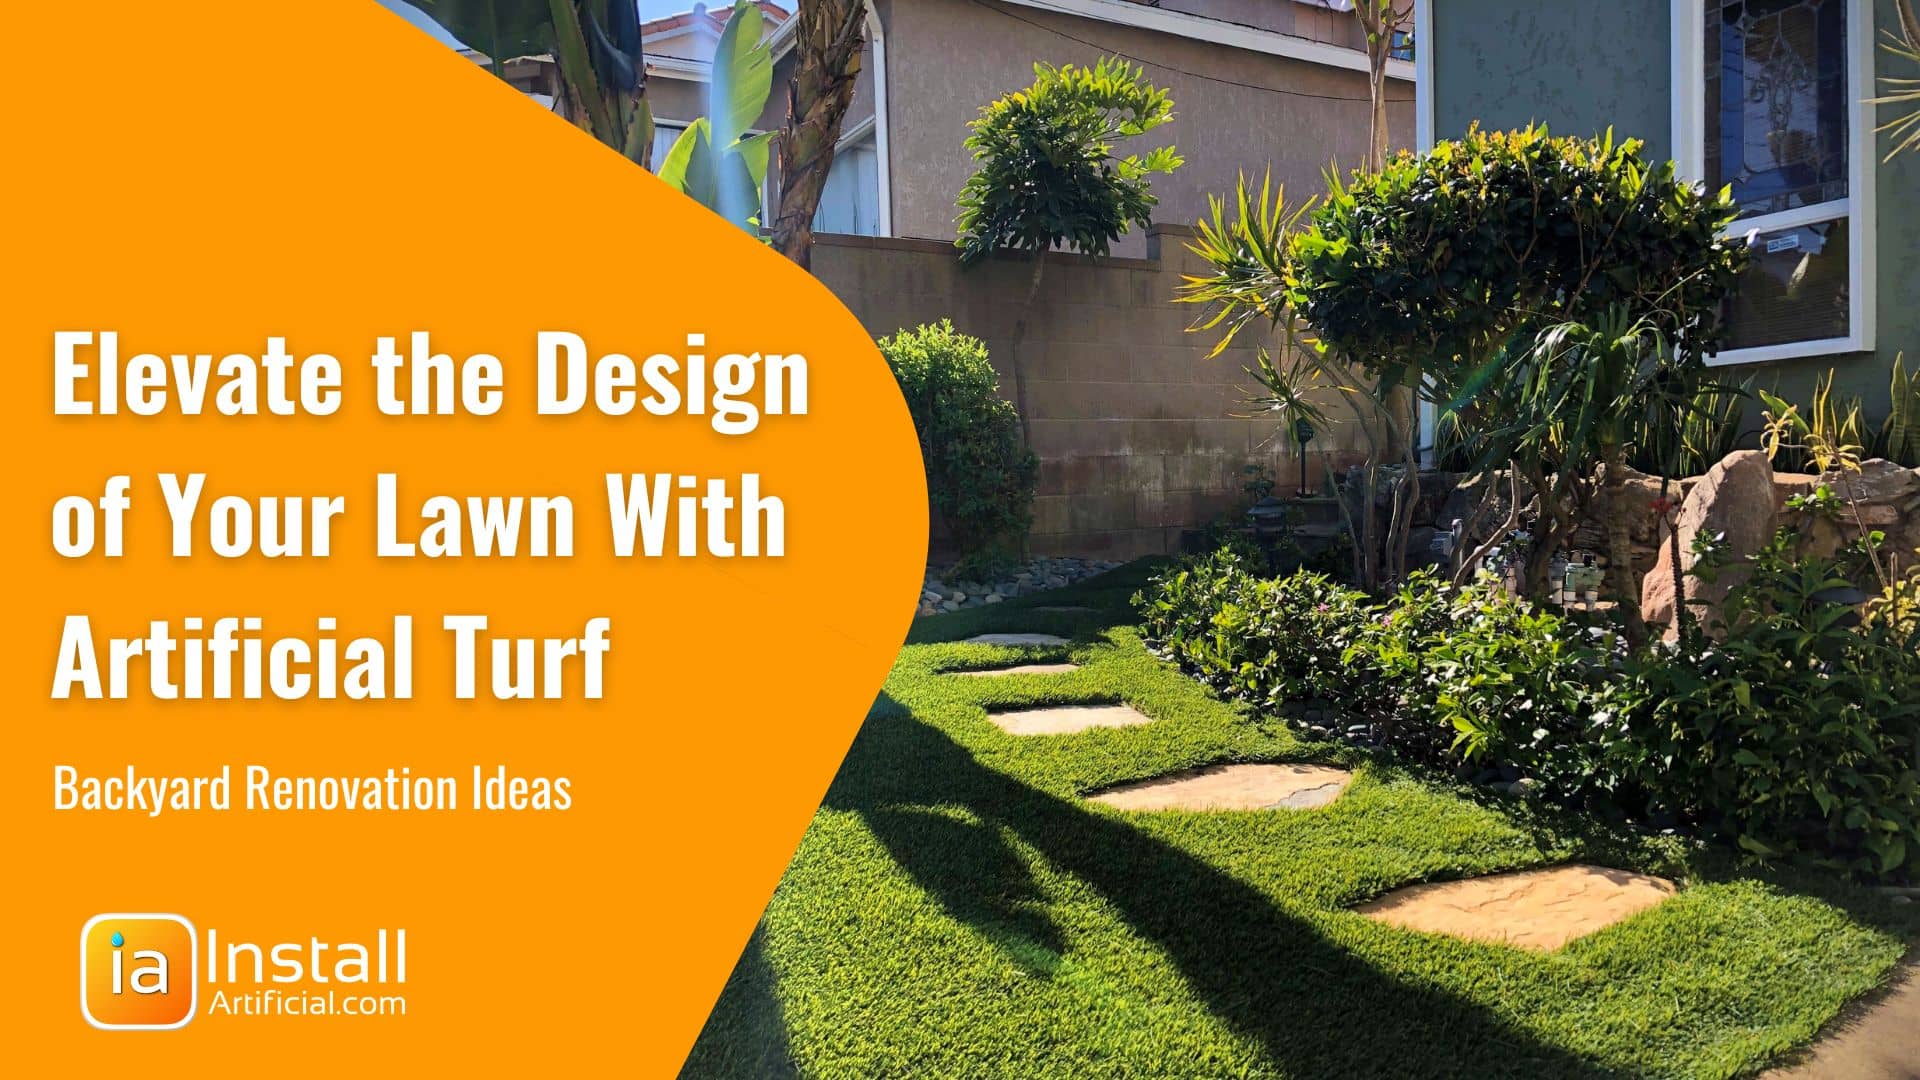 How to Elevate the Design of Your Backyard with Artificial Turf